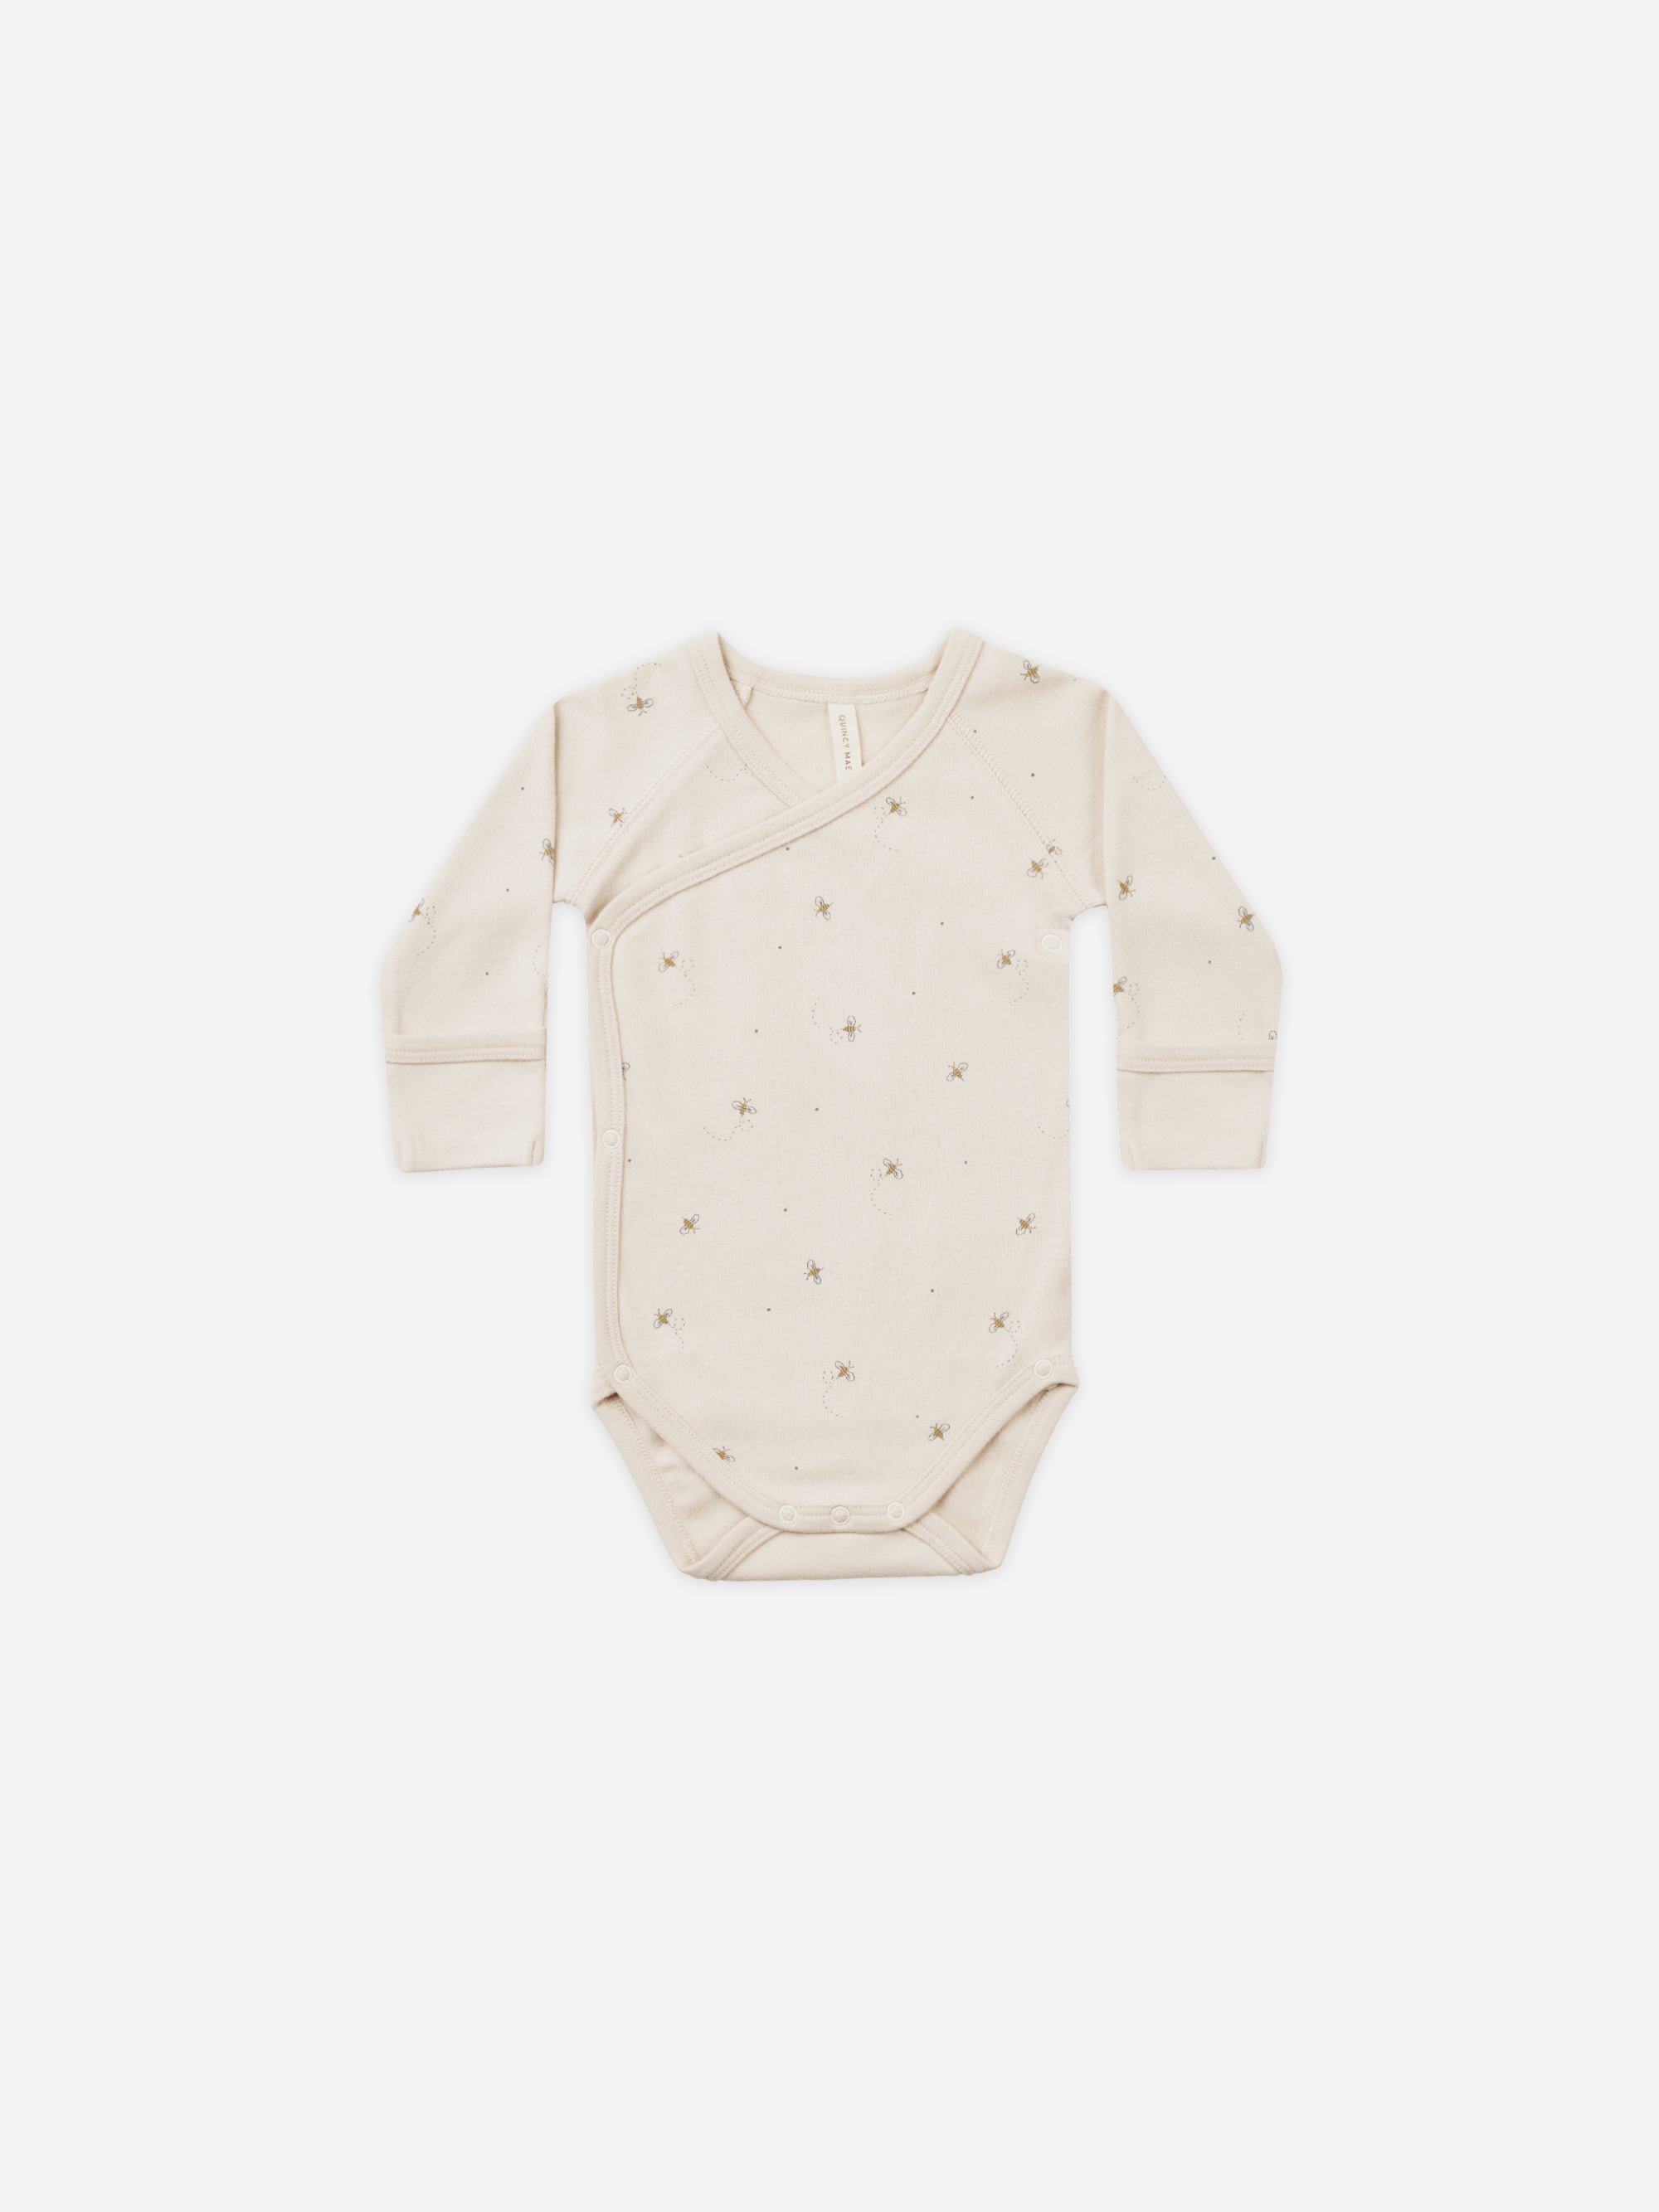 Side Snap Bodysuit || Bees - Rylee + Cru | Kids Clothes | Trendy Baby Clothes | Modern Infant Outfits |